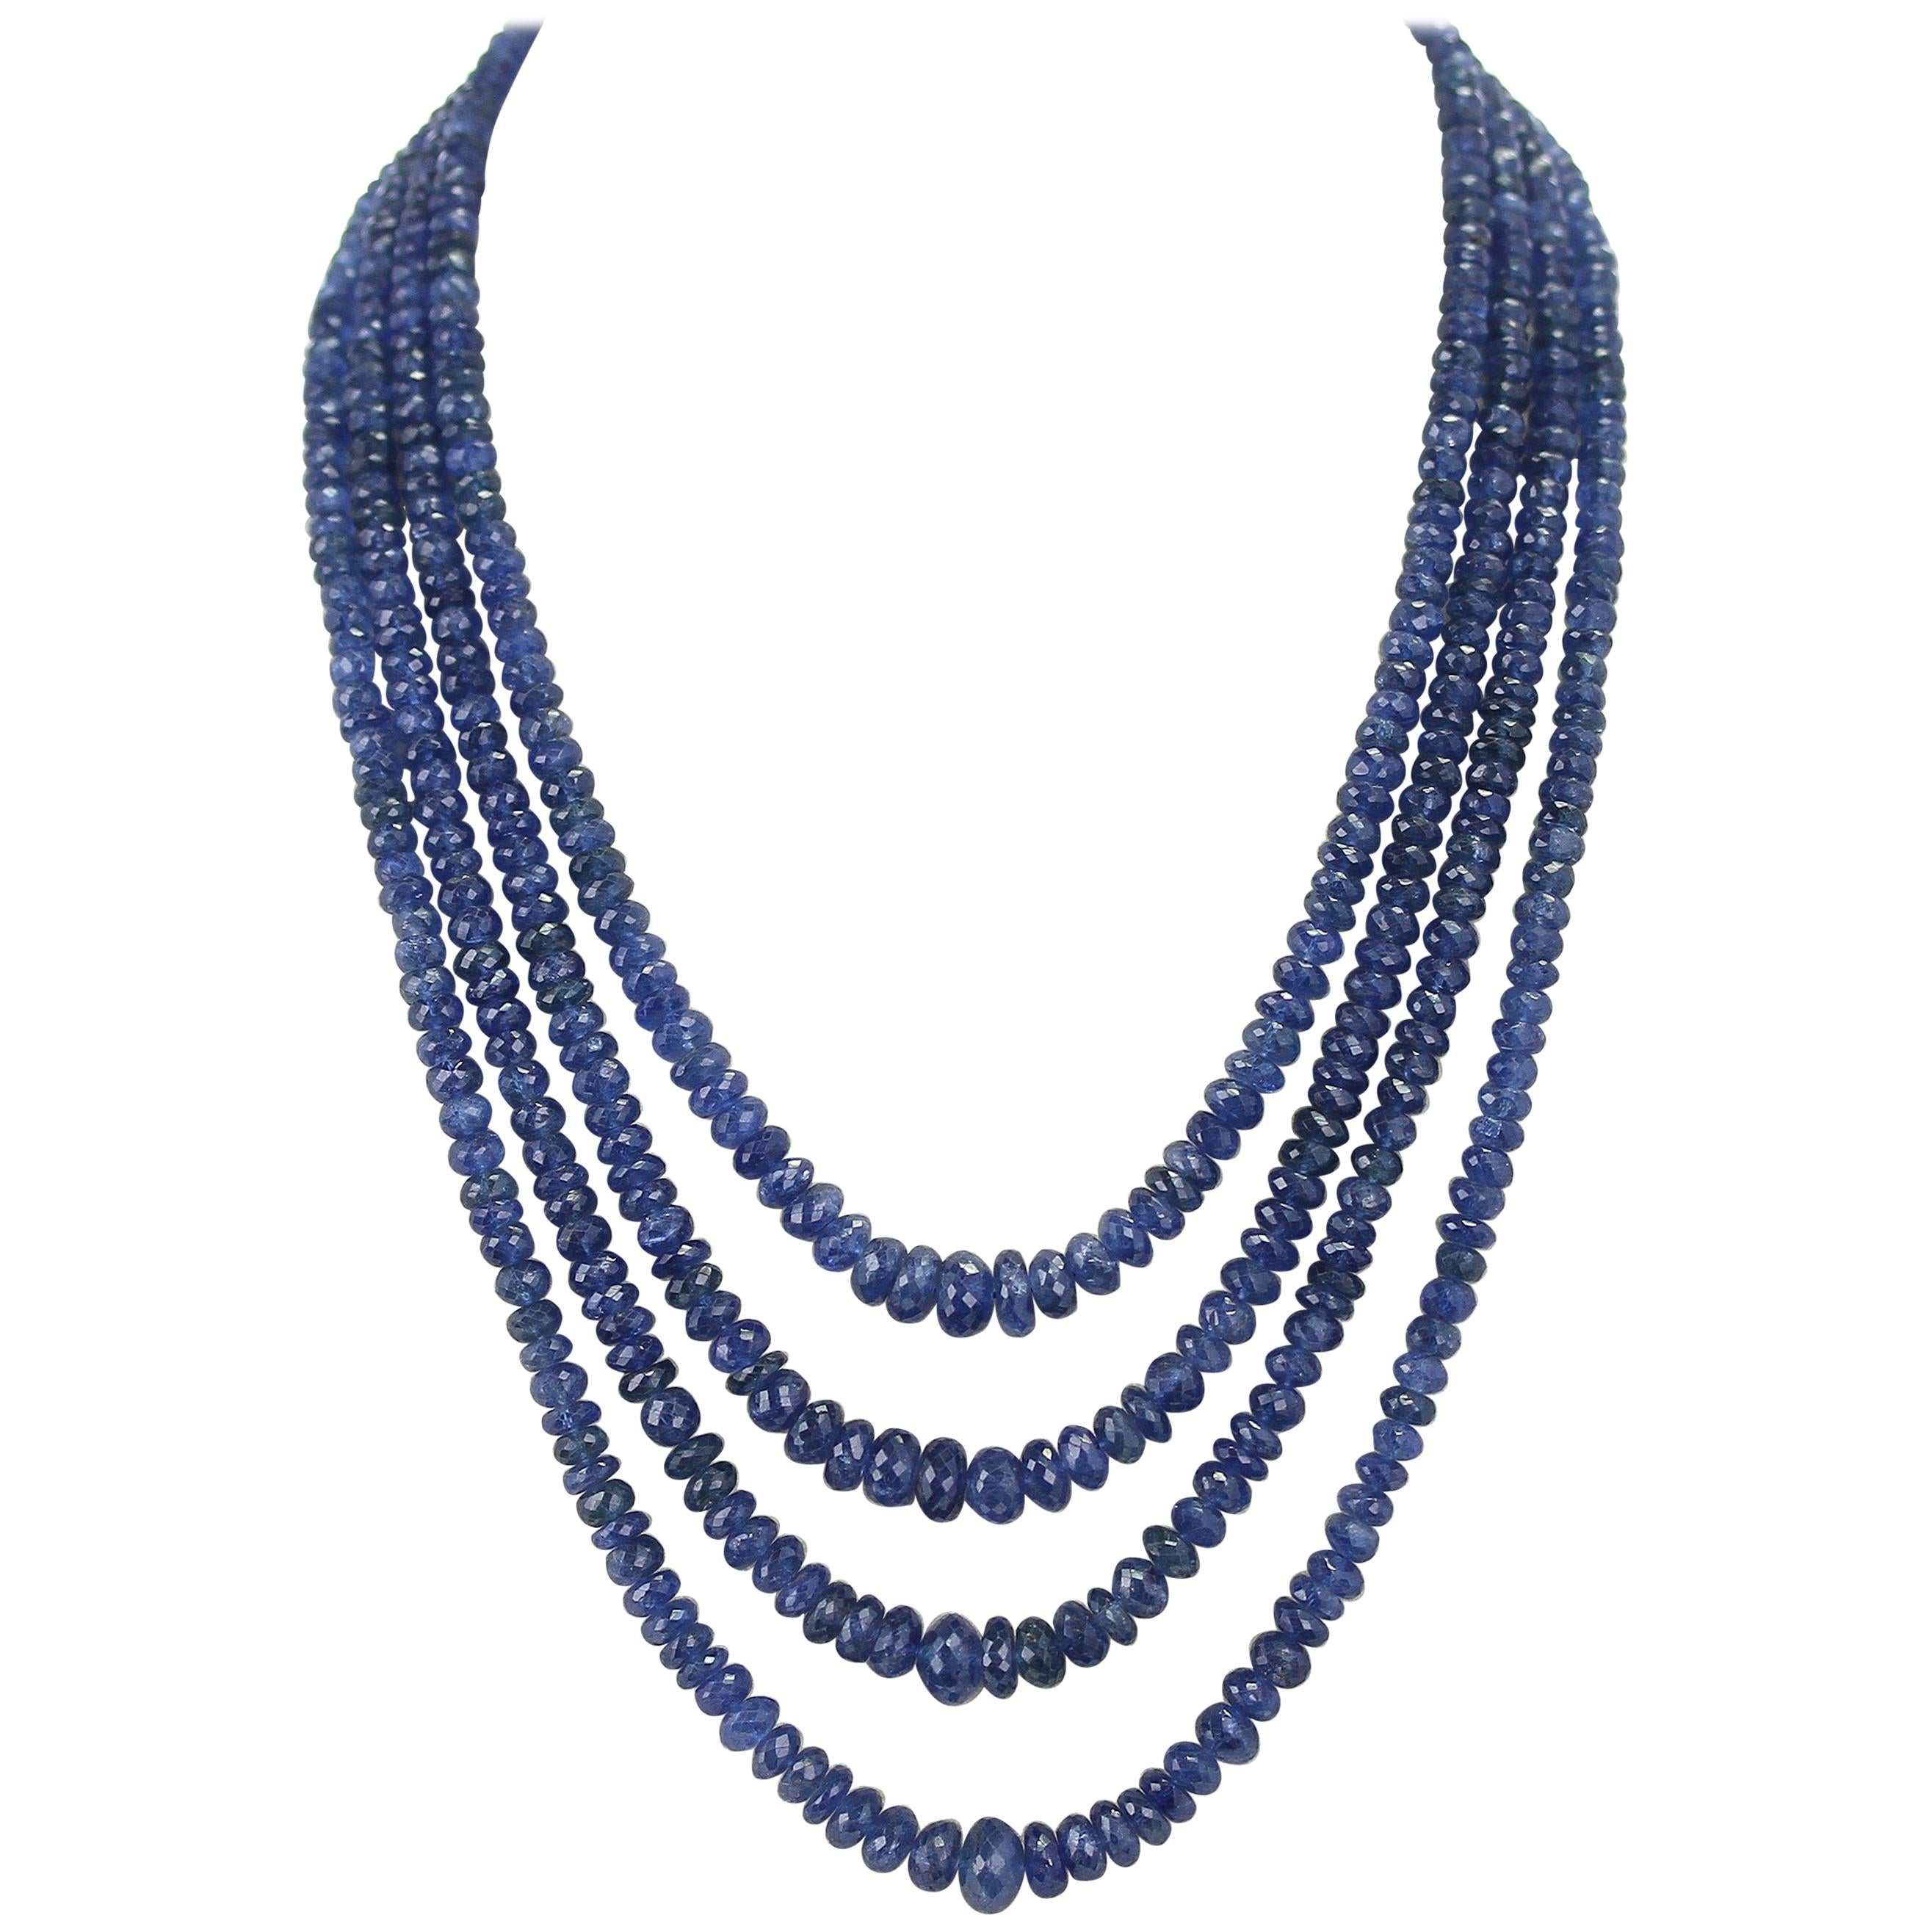 Genuine Top Natural 2x4mm Blue Sapphire Faceted Gems Beads Necklace 18'' AAA